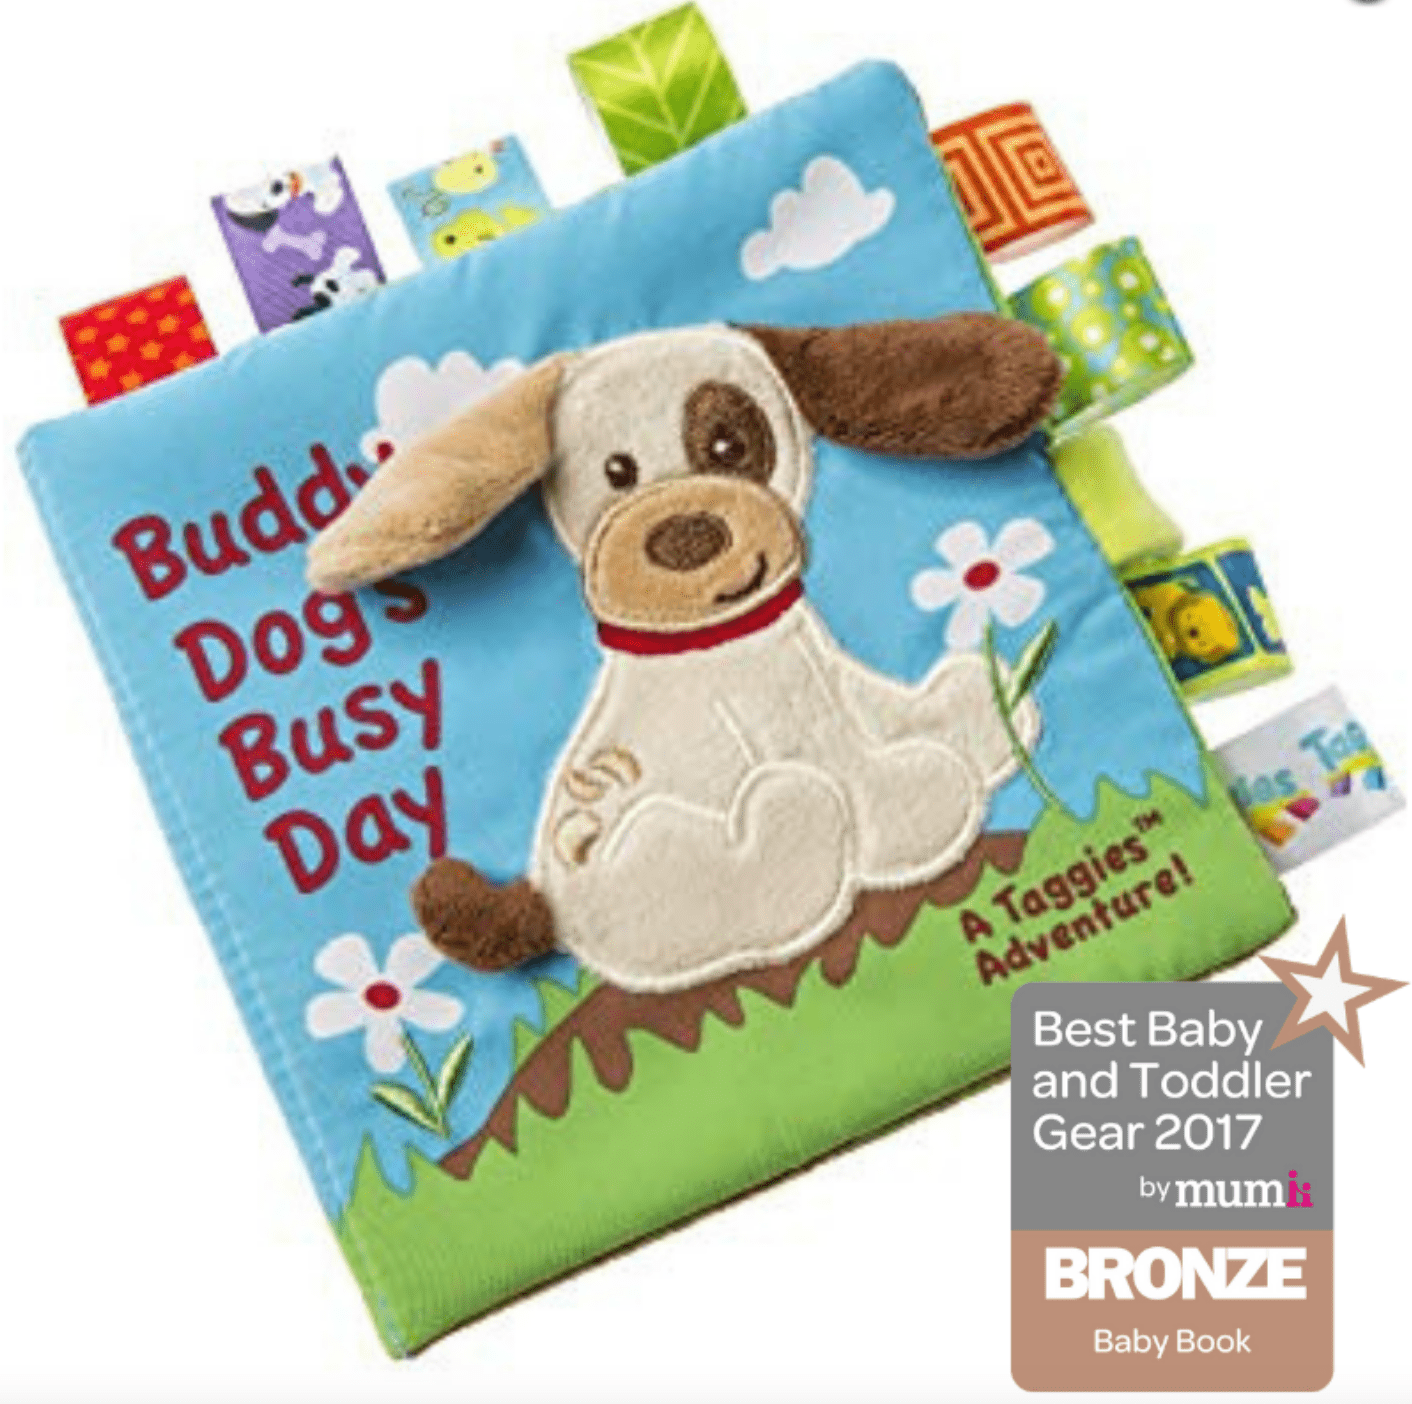 Taggies Buddy Dog Soft Book - Twinkle Twinkle Little One